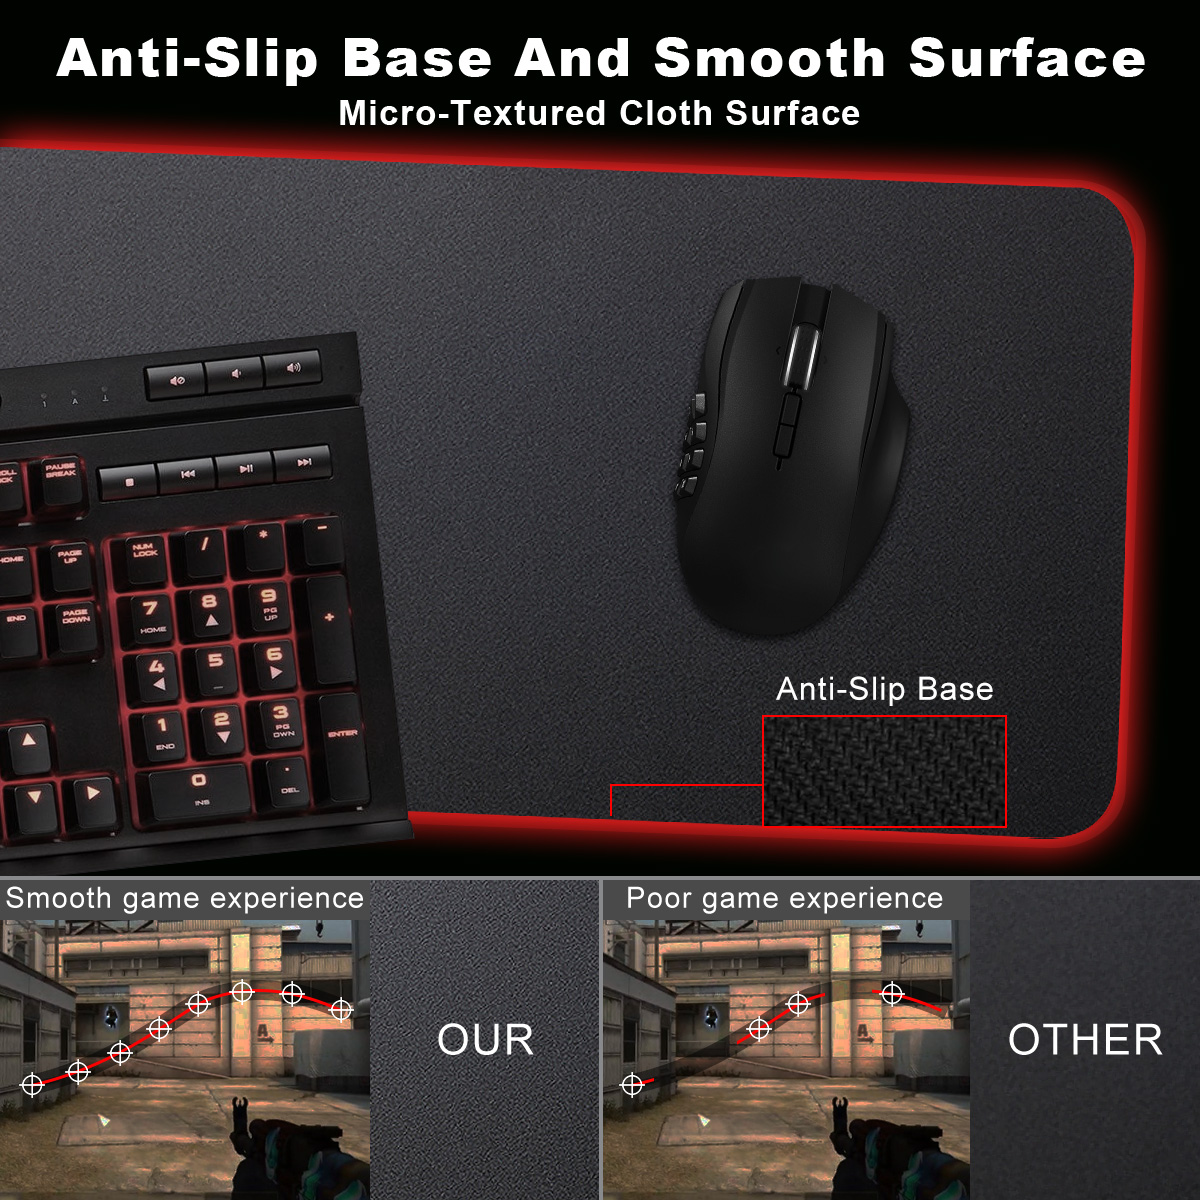 RGB Mouse Pad, RGB Gaming Mouse Pad, Large Mouse Pad, Extended Mouse Pad, 32" x 12" Long Computer Mouse Pad w/ Non-Slip Rubber Base, Smooth Surface Waterproof Keyboard Mouse Pad w/ USB Port - image 5 of 8